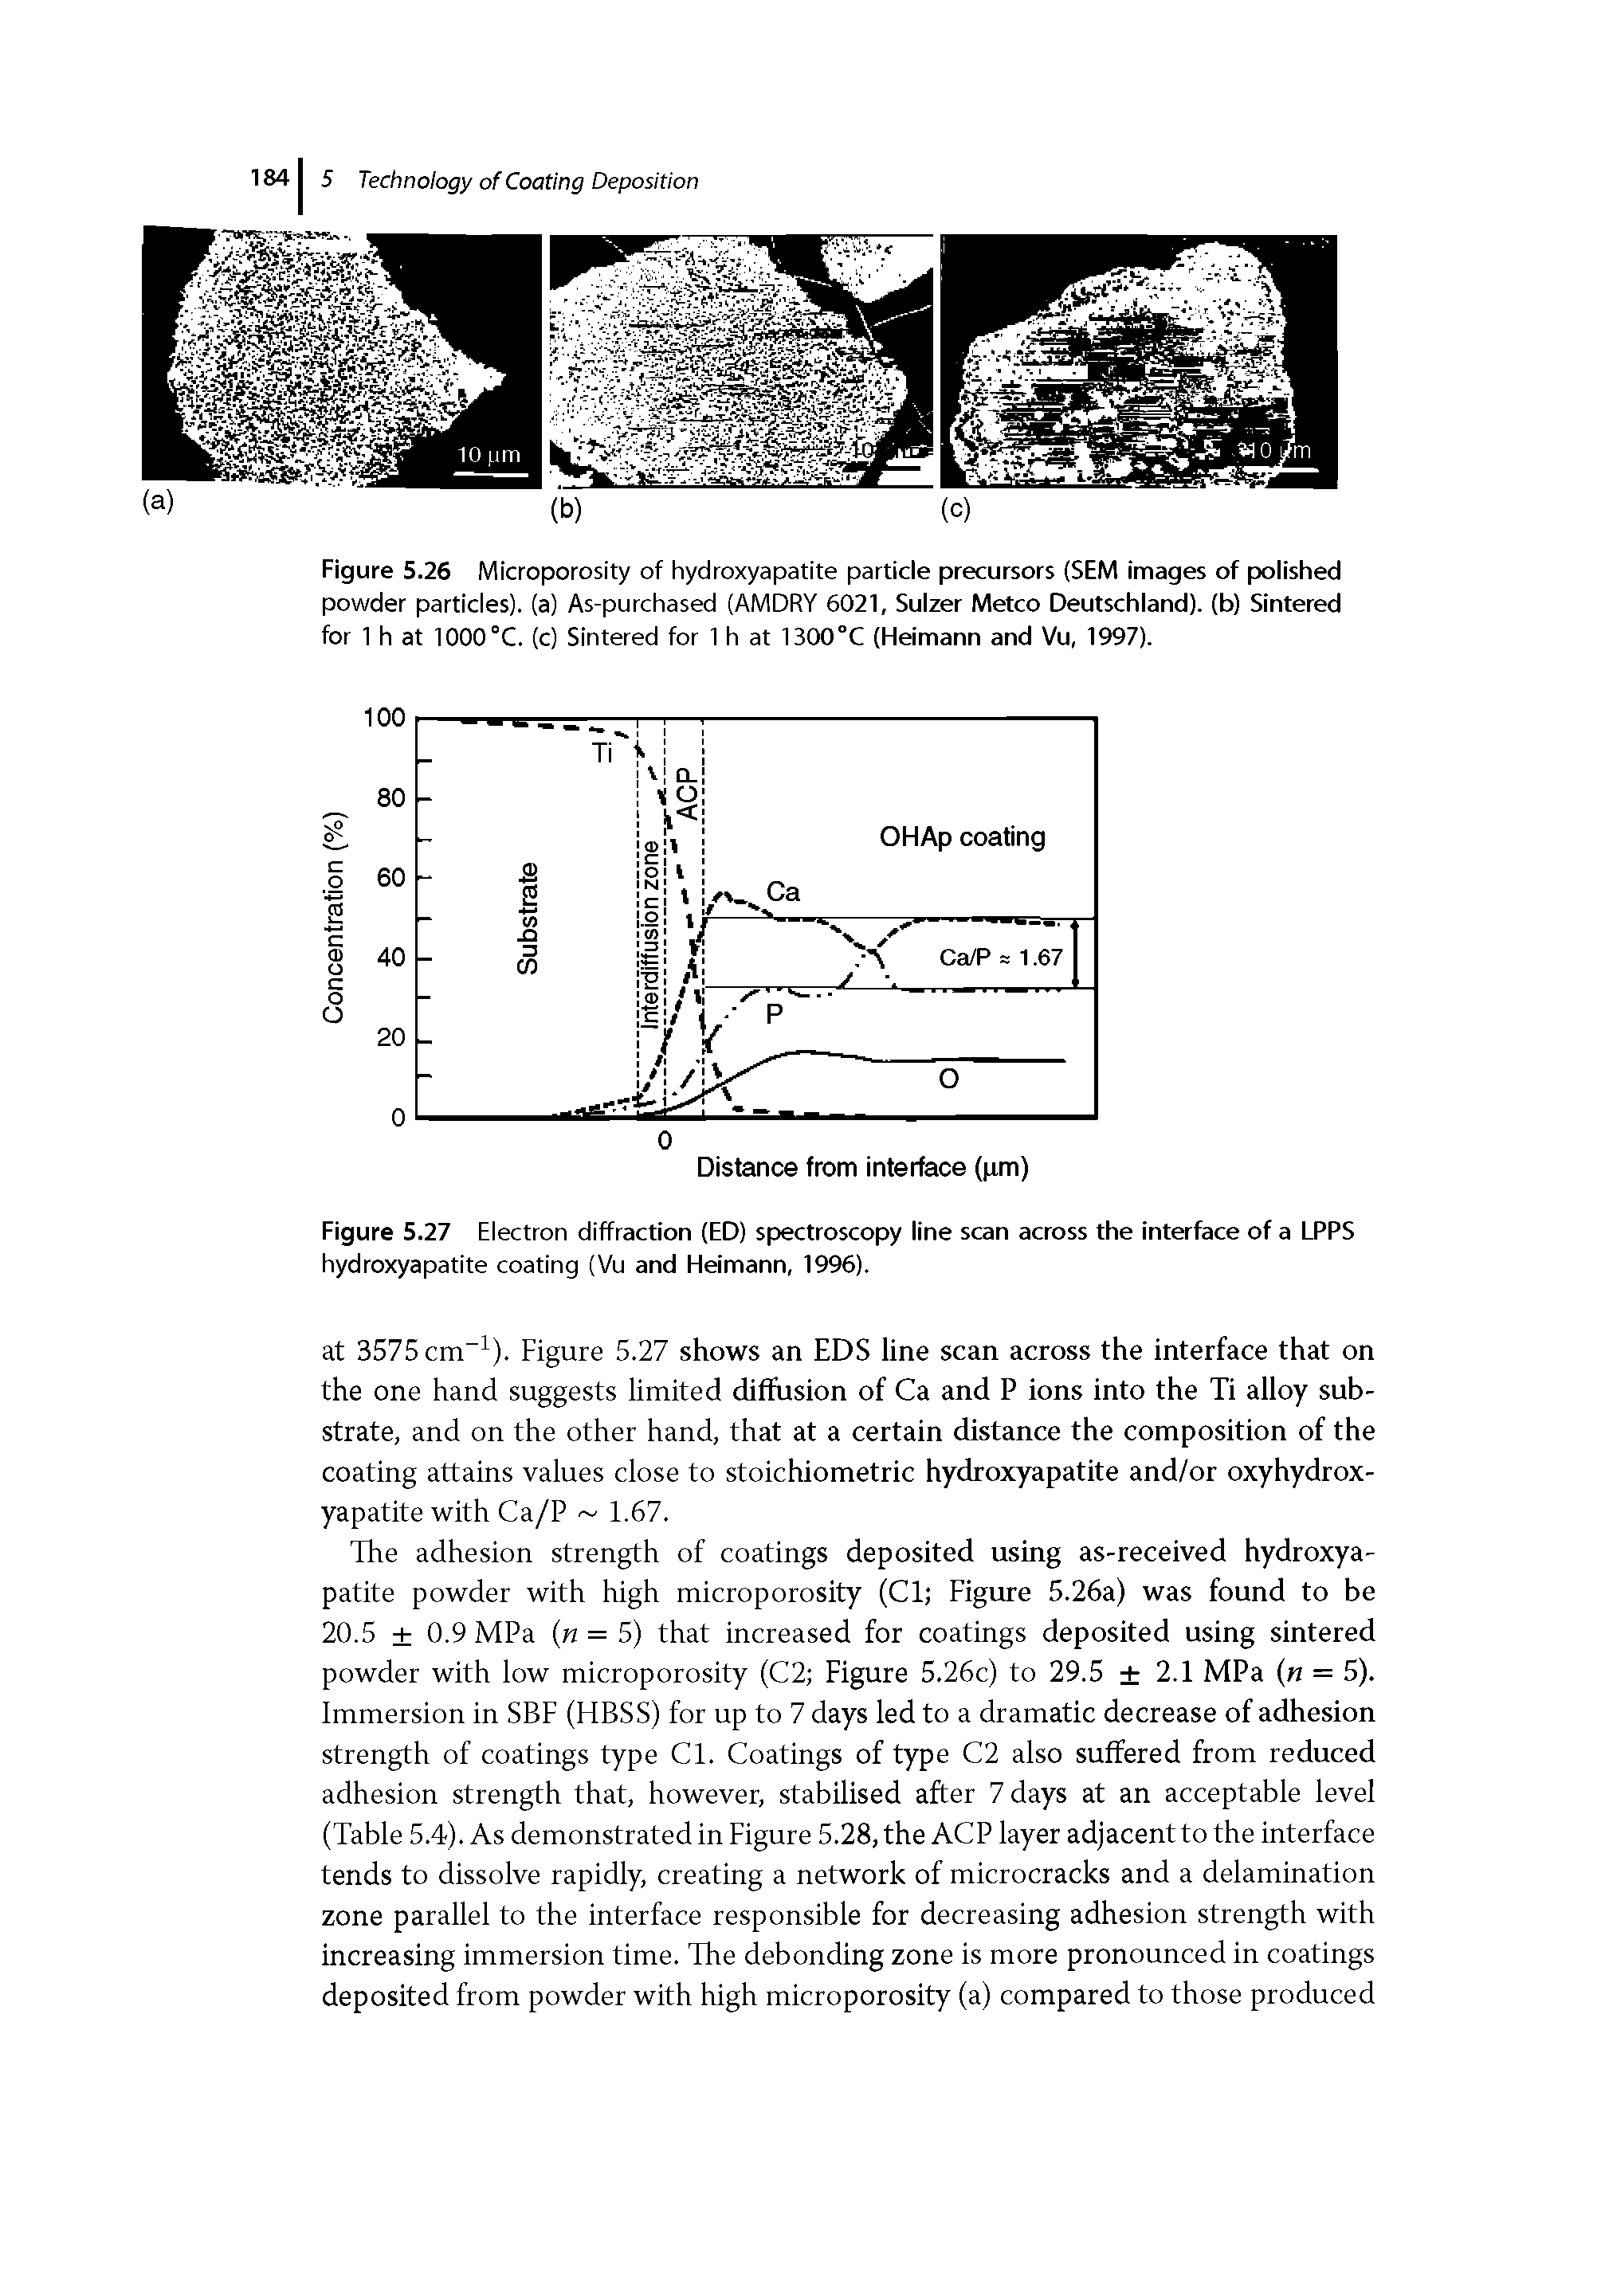 Figure 5.26 Microporosity of hydroxyapatite particle precursors (SEM images of polished powder particles), (a) As-purchased (AMDRY 6021, Sulzer Metco Deutschland), (b) Sintered for 1 h at 1000°C. (c) Sintered for 1 h at 1300°C (Heimann and Vu, 1997).